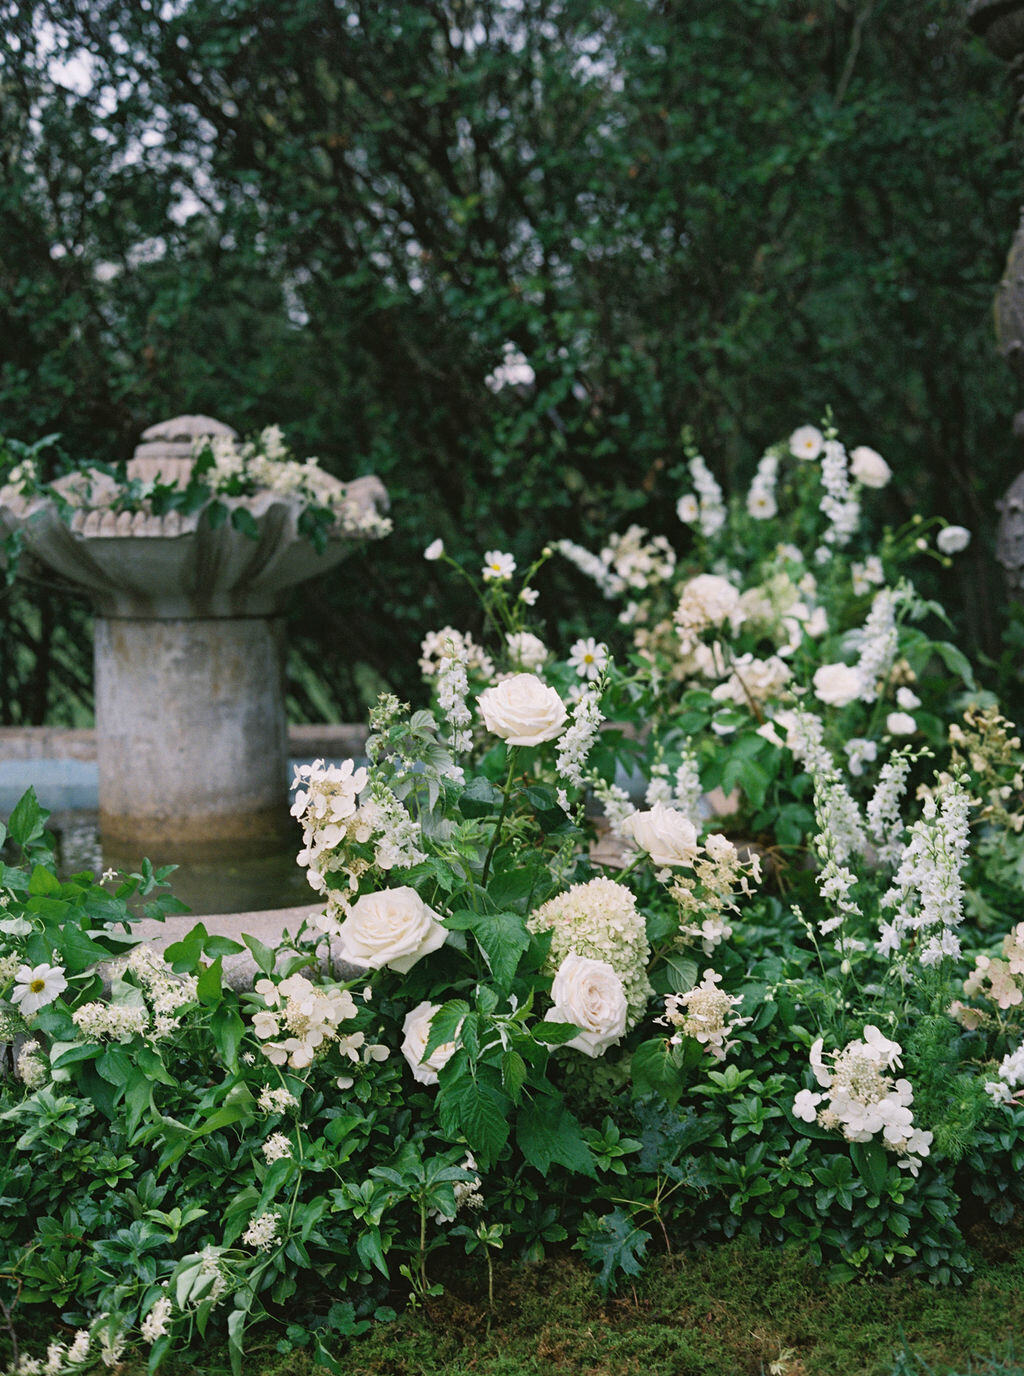 Florals covering water fountain at the Evergreen Museum ceremony including white larkspur, white quick-fire hydrangea, white Japanese anemone, white lisianthus, white garden roses and lush organic greenery.